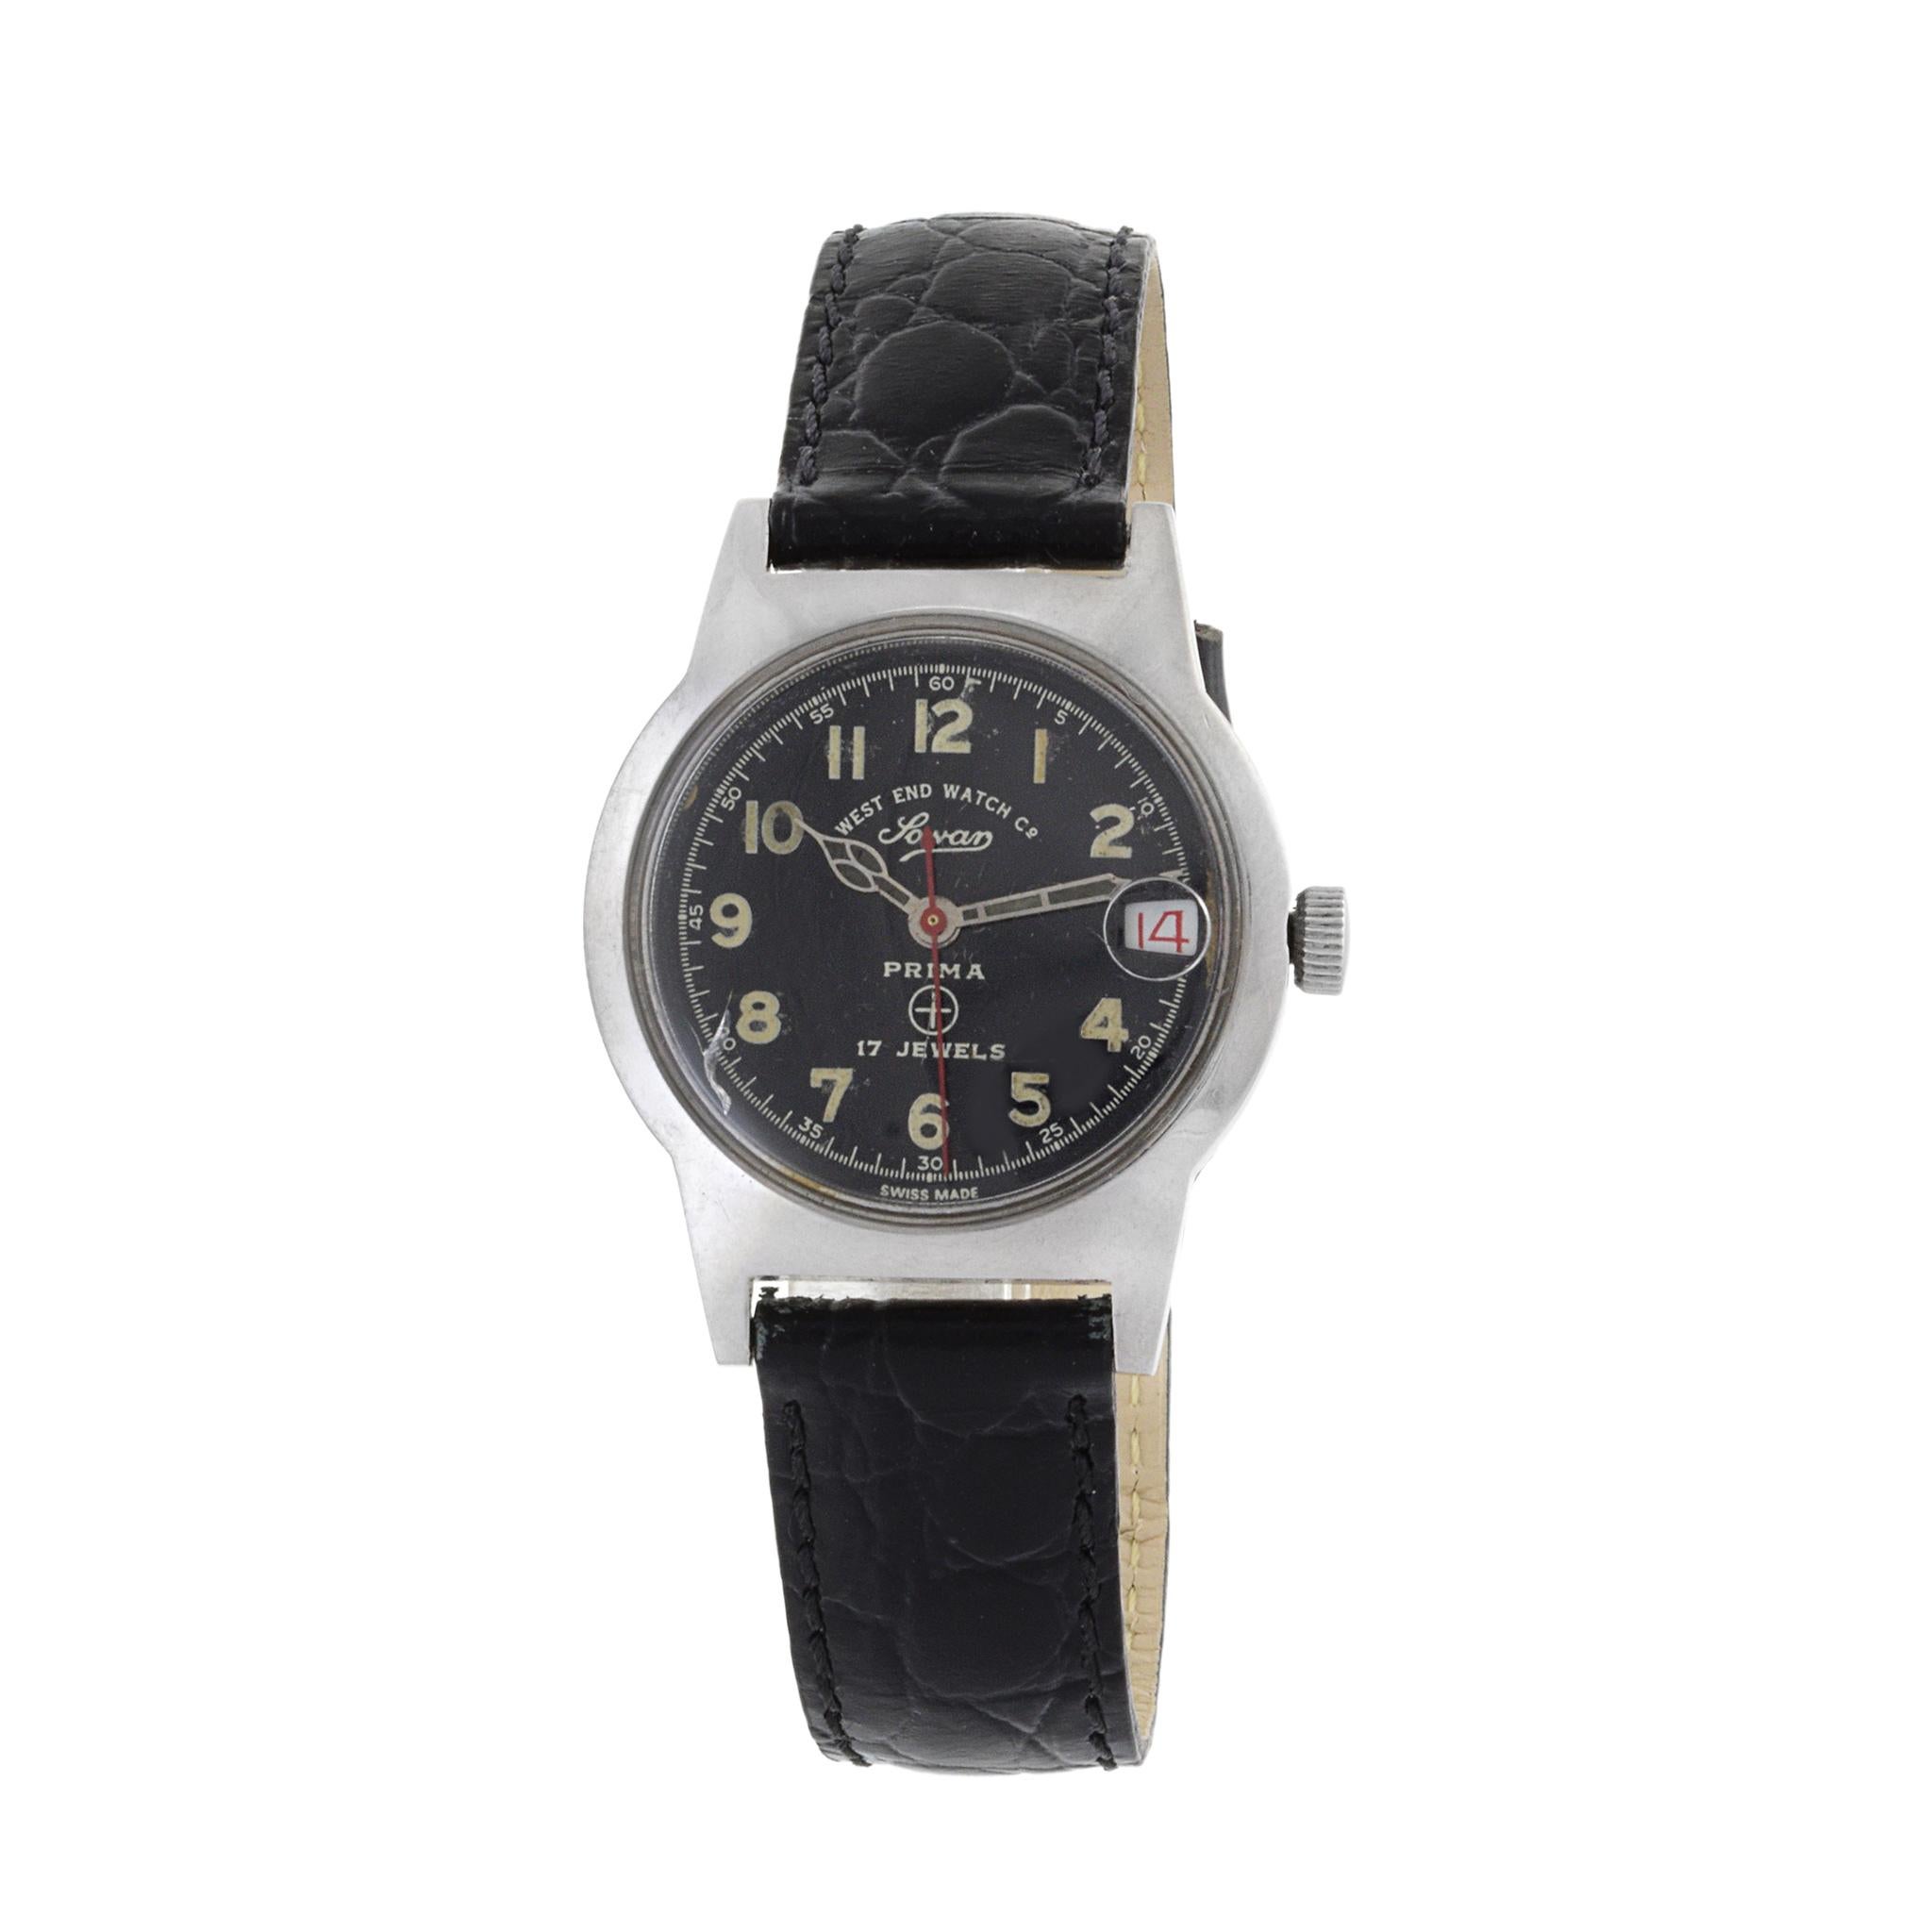 This is a rare mint condition West End Watch Co. Sowar military watch. This watch is powered by a 17 jewel Swiss manual wind movement. What contributes to its rarity is the fact that it has a date function which most military watches do not.

The